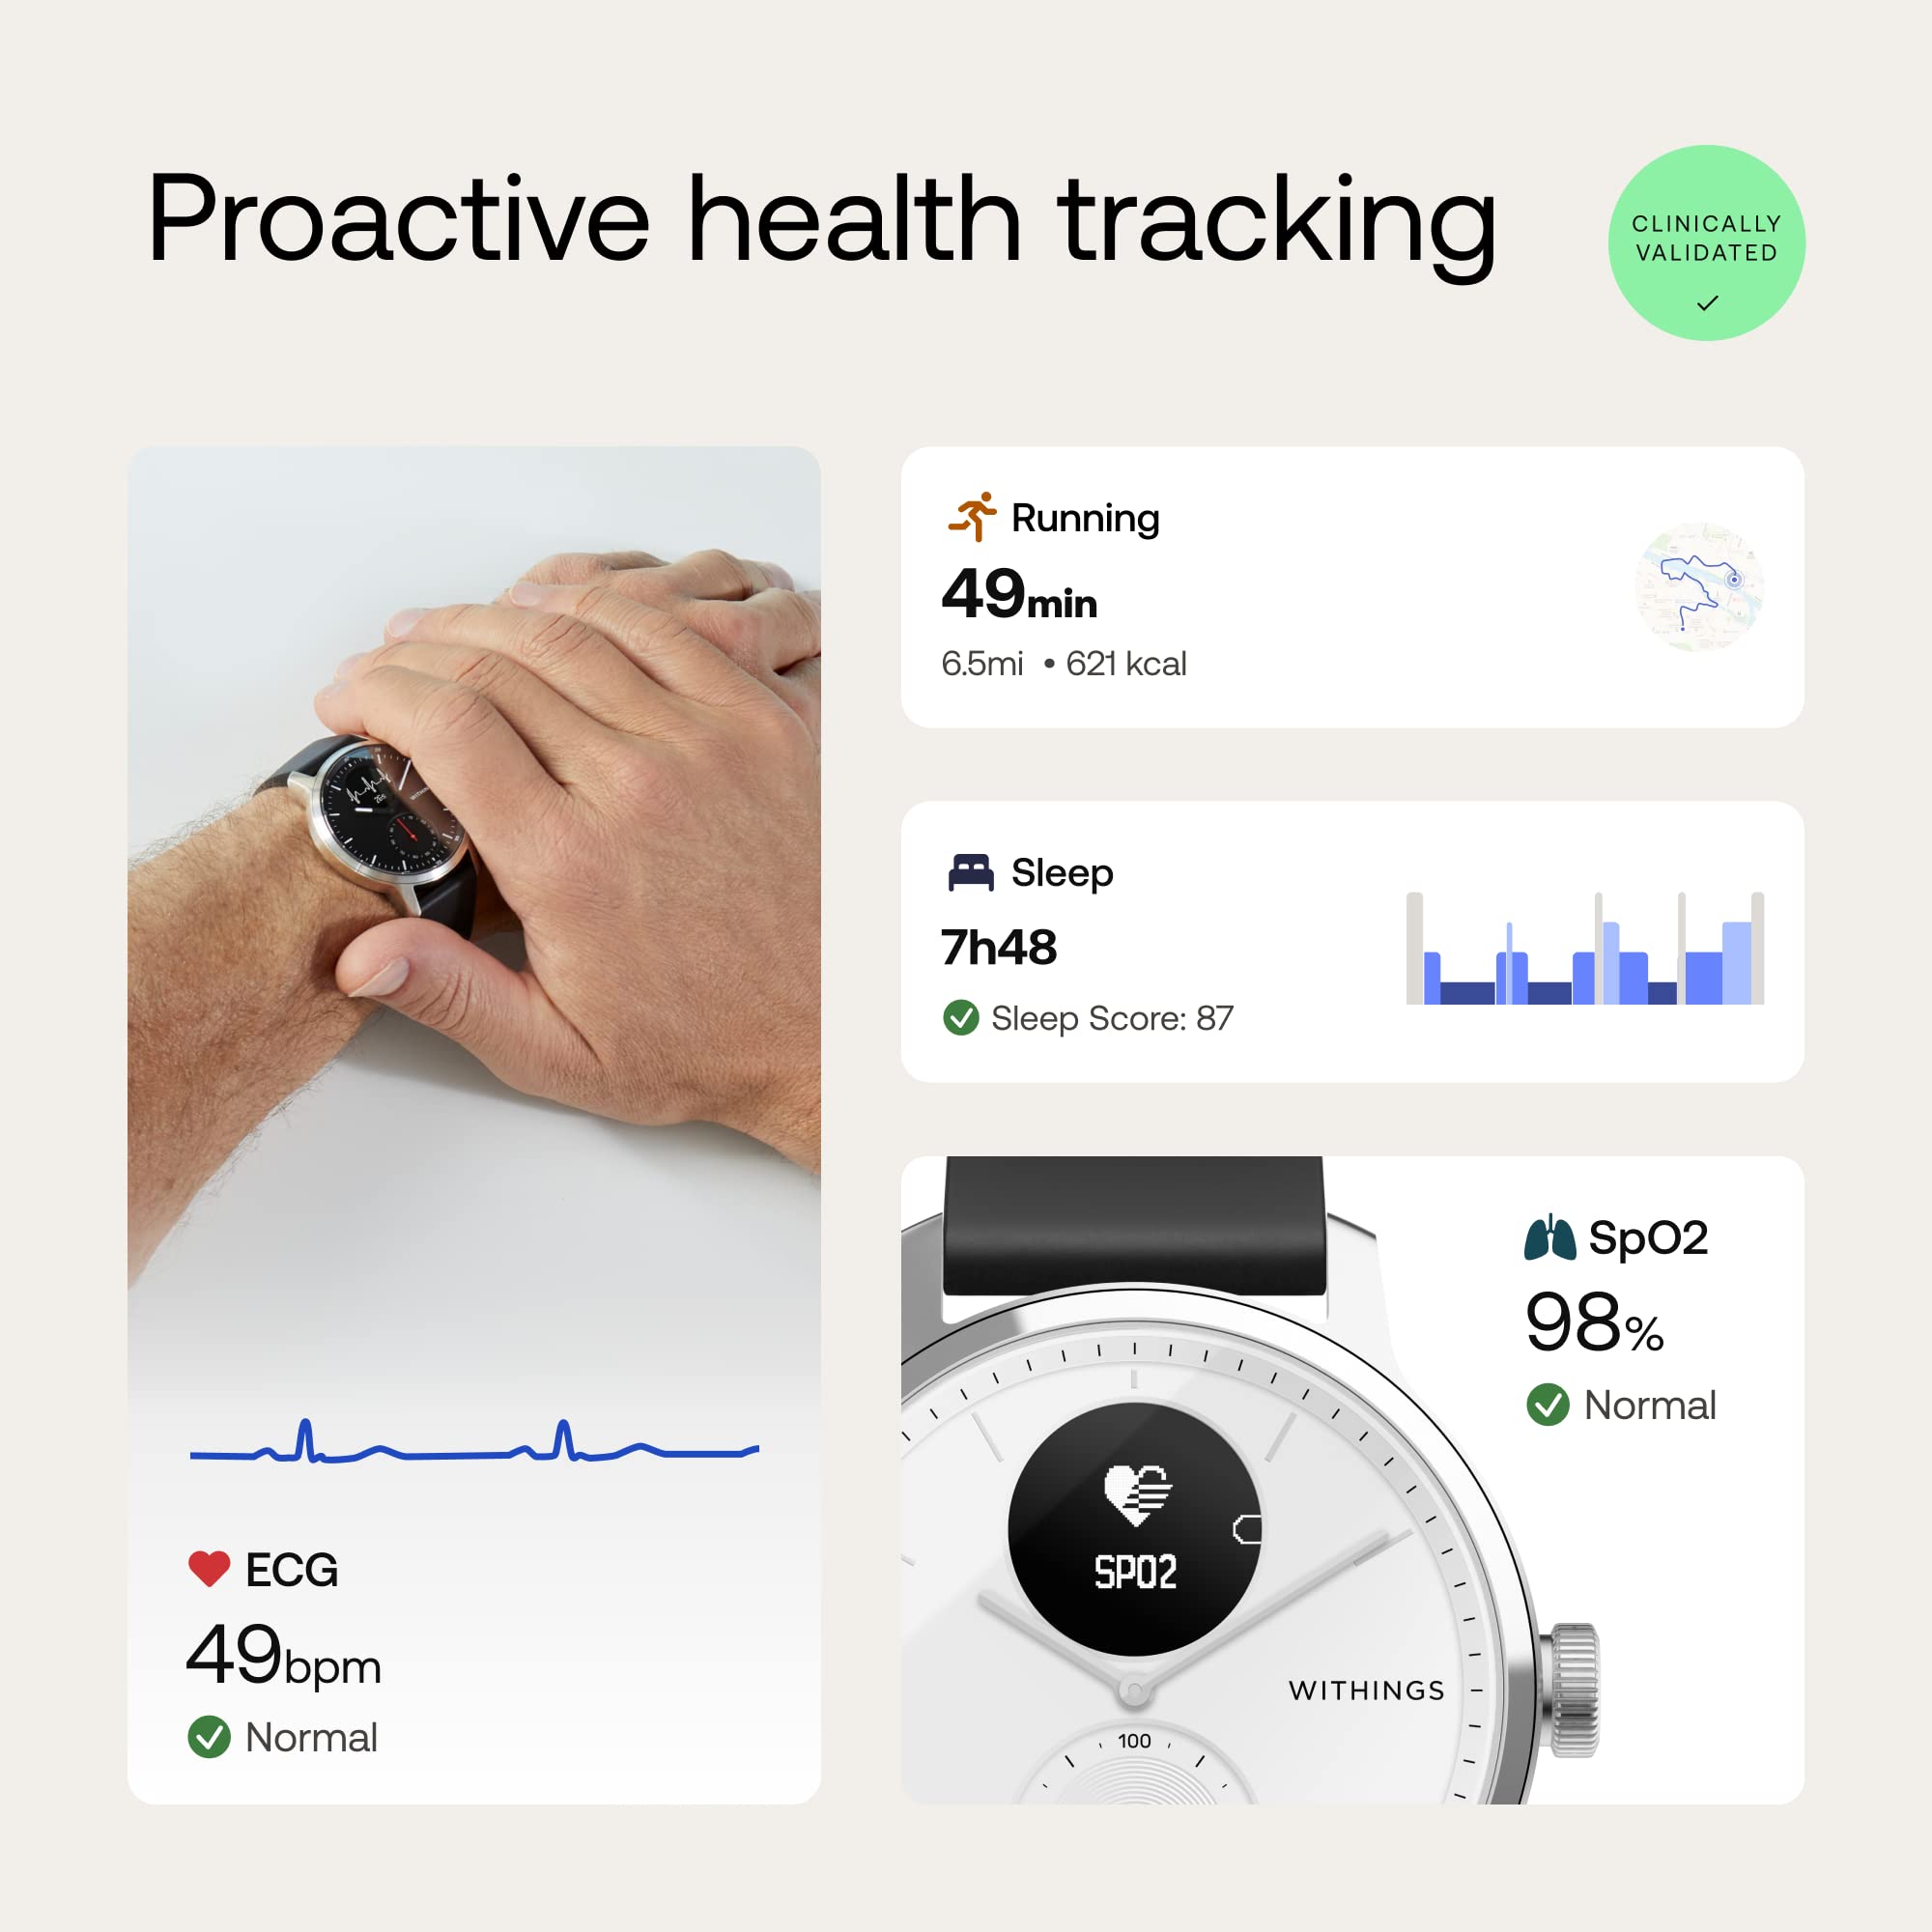 Withings Scanwatch - Smart Watch & Activity Tracker: Heart Monitor, Sleep Tracker, Smart Notifications, Step Counter, Waterproof with 30-Day Battery Life, Android & Apple Compatible, GPS, HSA/FSA